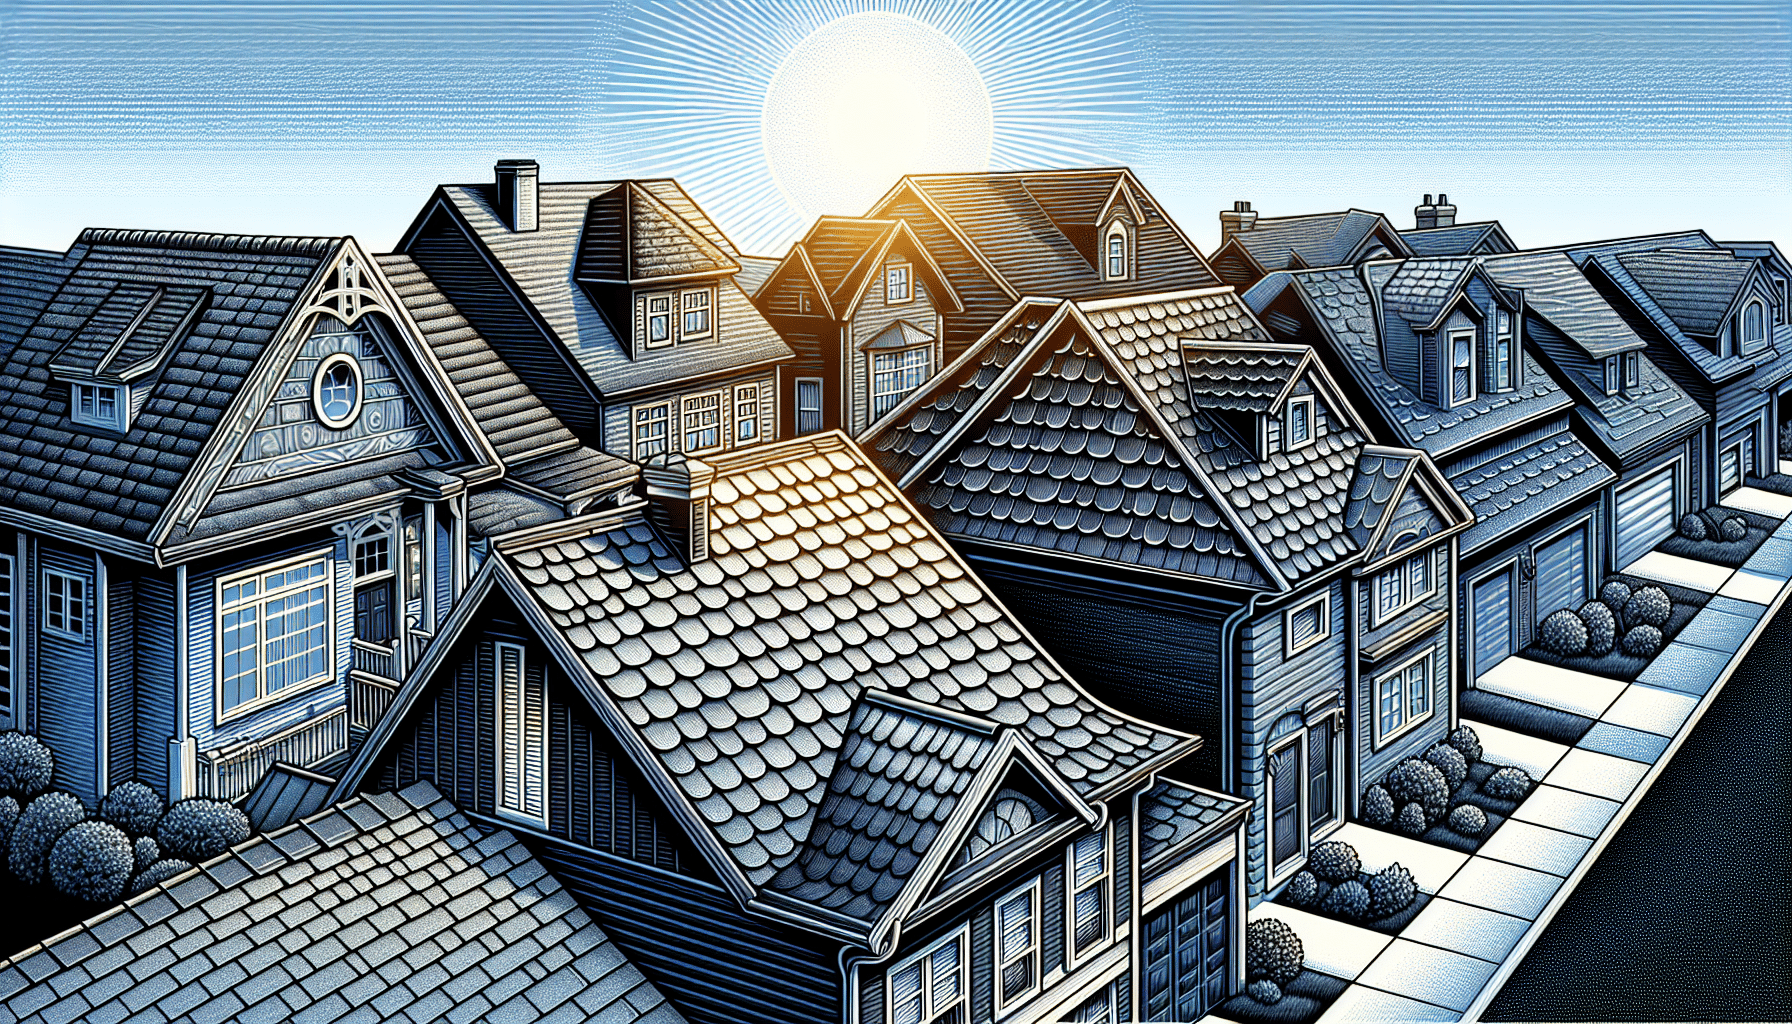 Illustration of various roofing materials